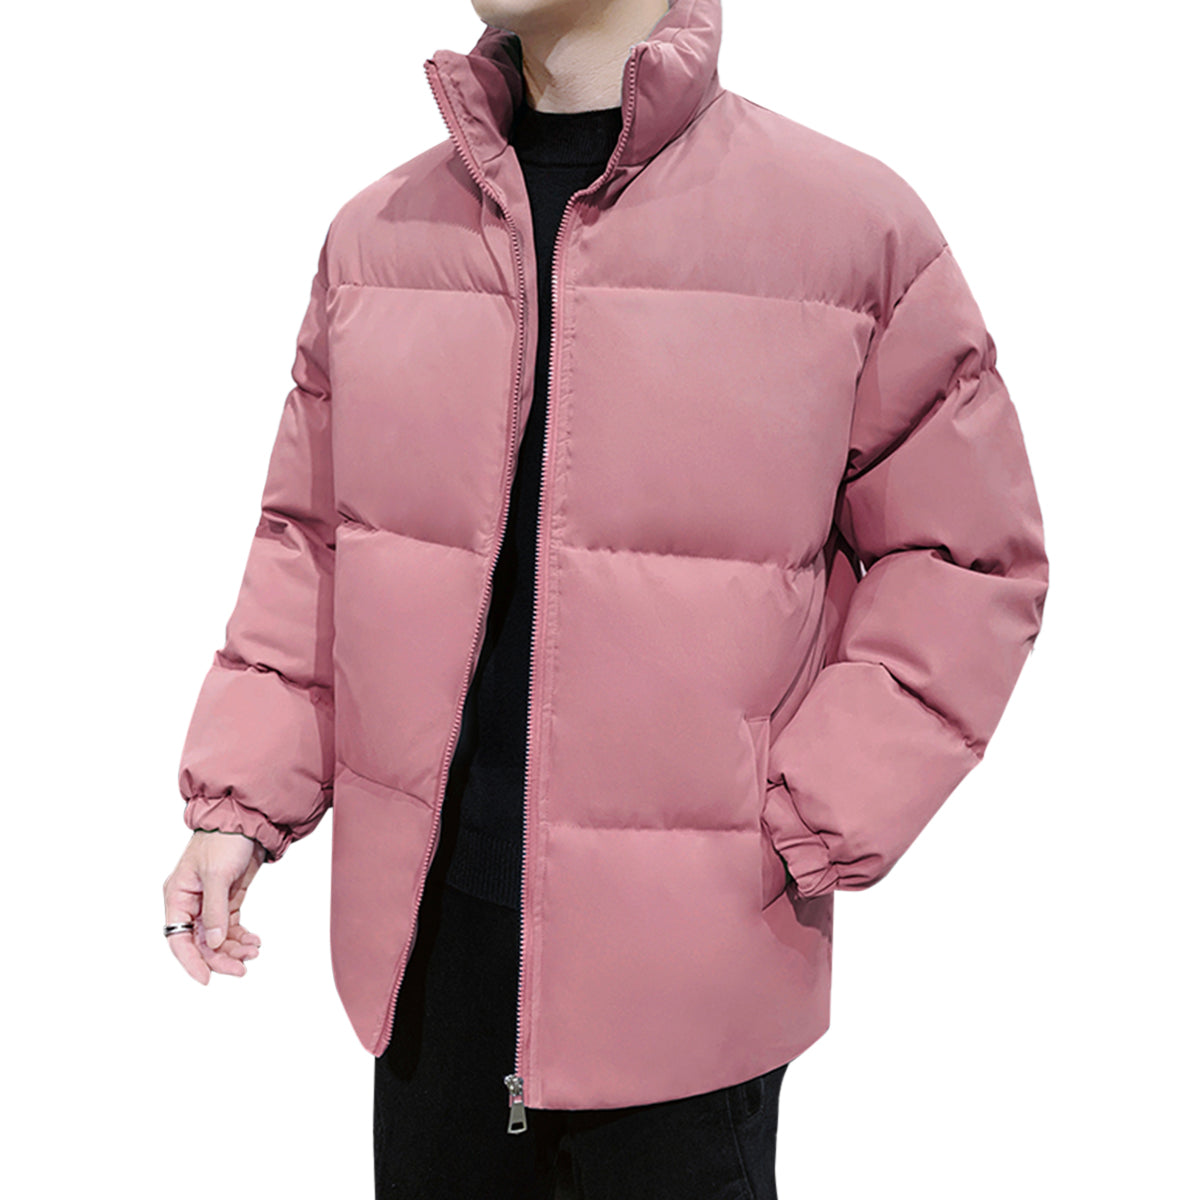 Men's Solid Color Stand Collar Cotton Coat Pink